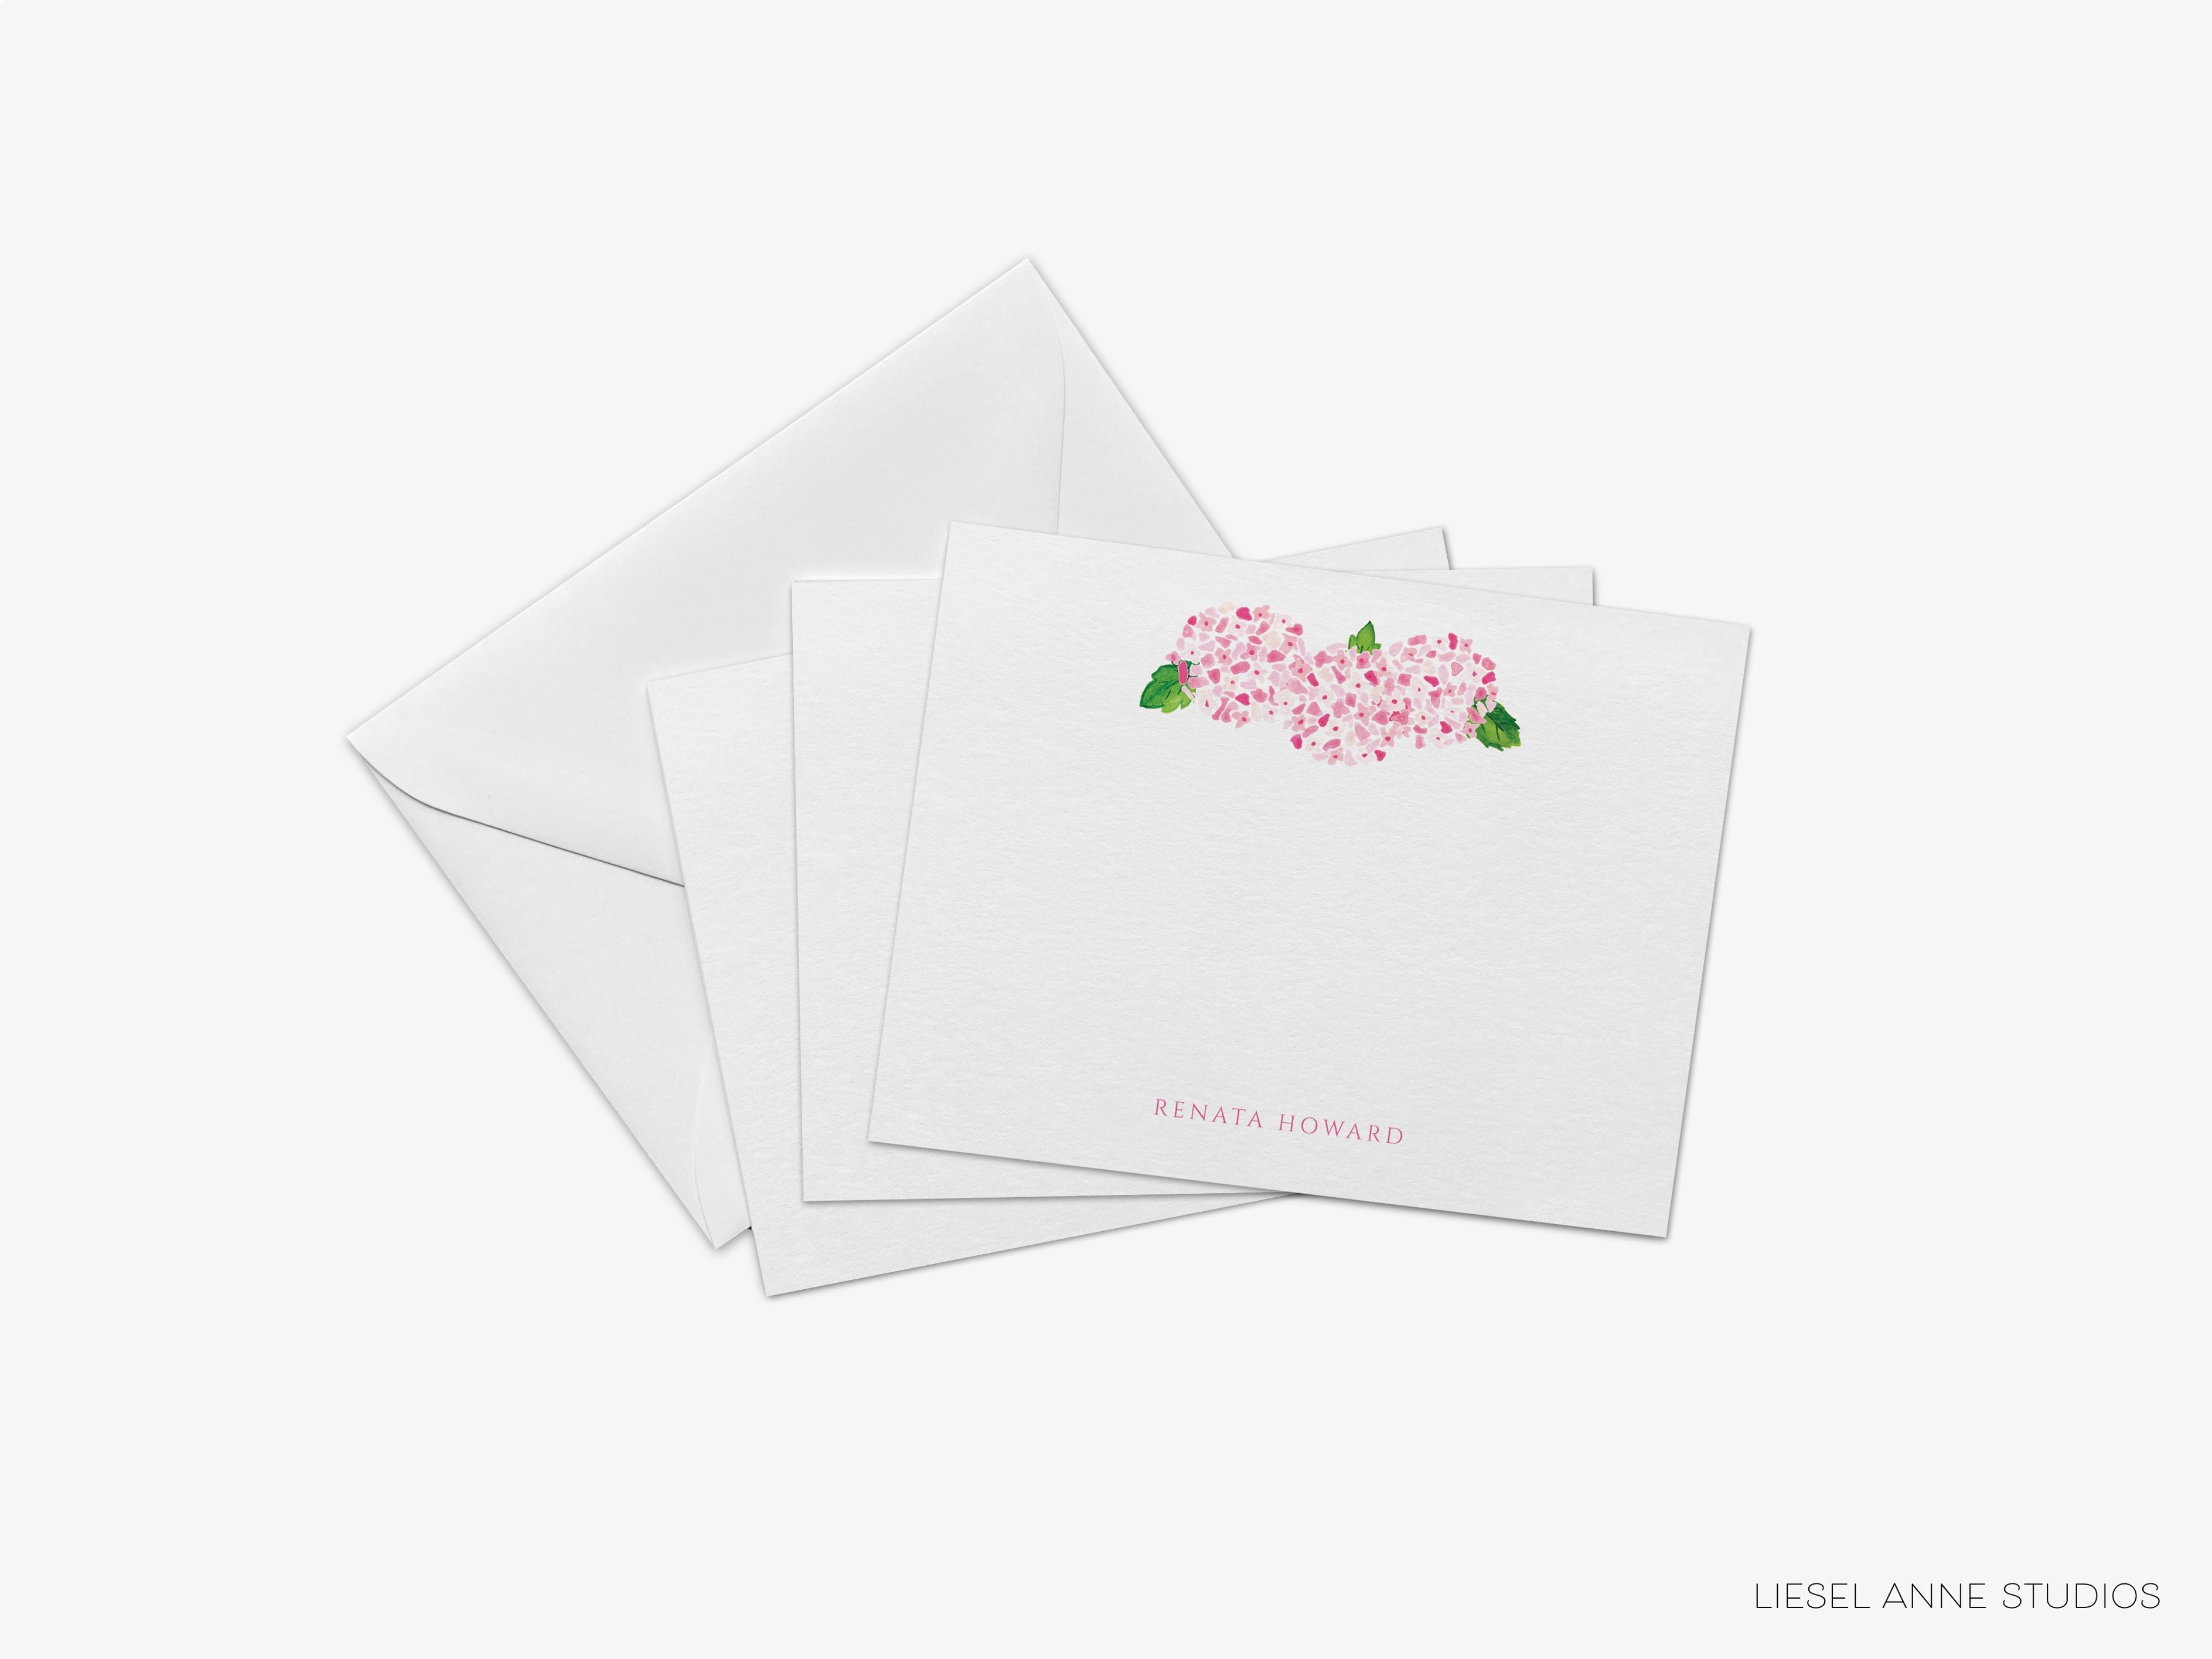 Personalized Pink Hydrangea Flat Notes-These personalized flat notecards are 4.25x5.5 and feature our hand-painted watercolor Hydrangeas, printed in the USA on 120lb textured stock. They come with your choice of envelopes and make great thank yous and gifts for the floral lover in your life.-The Singing Little Bird